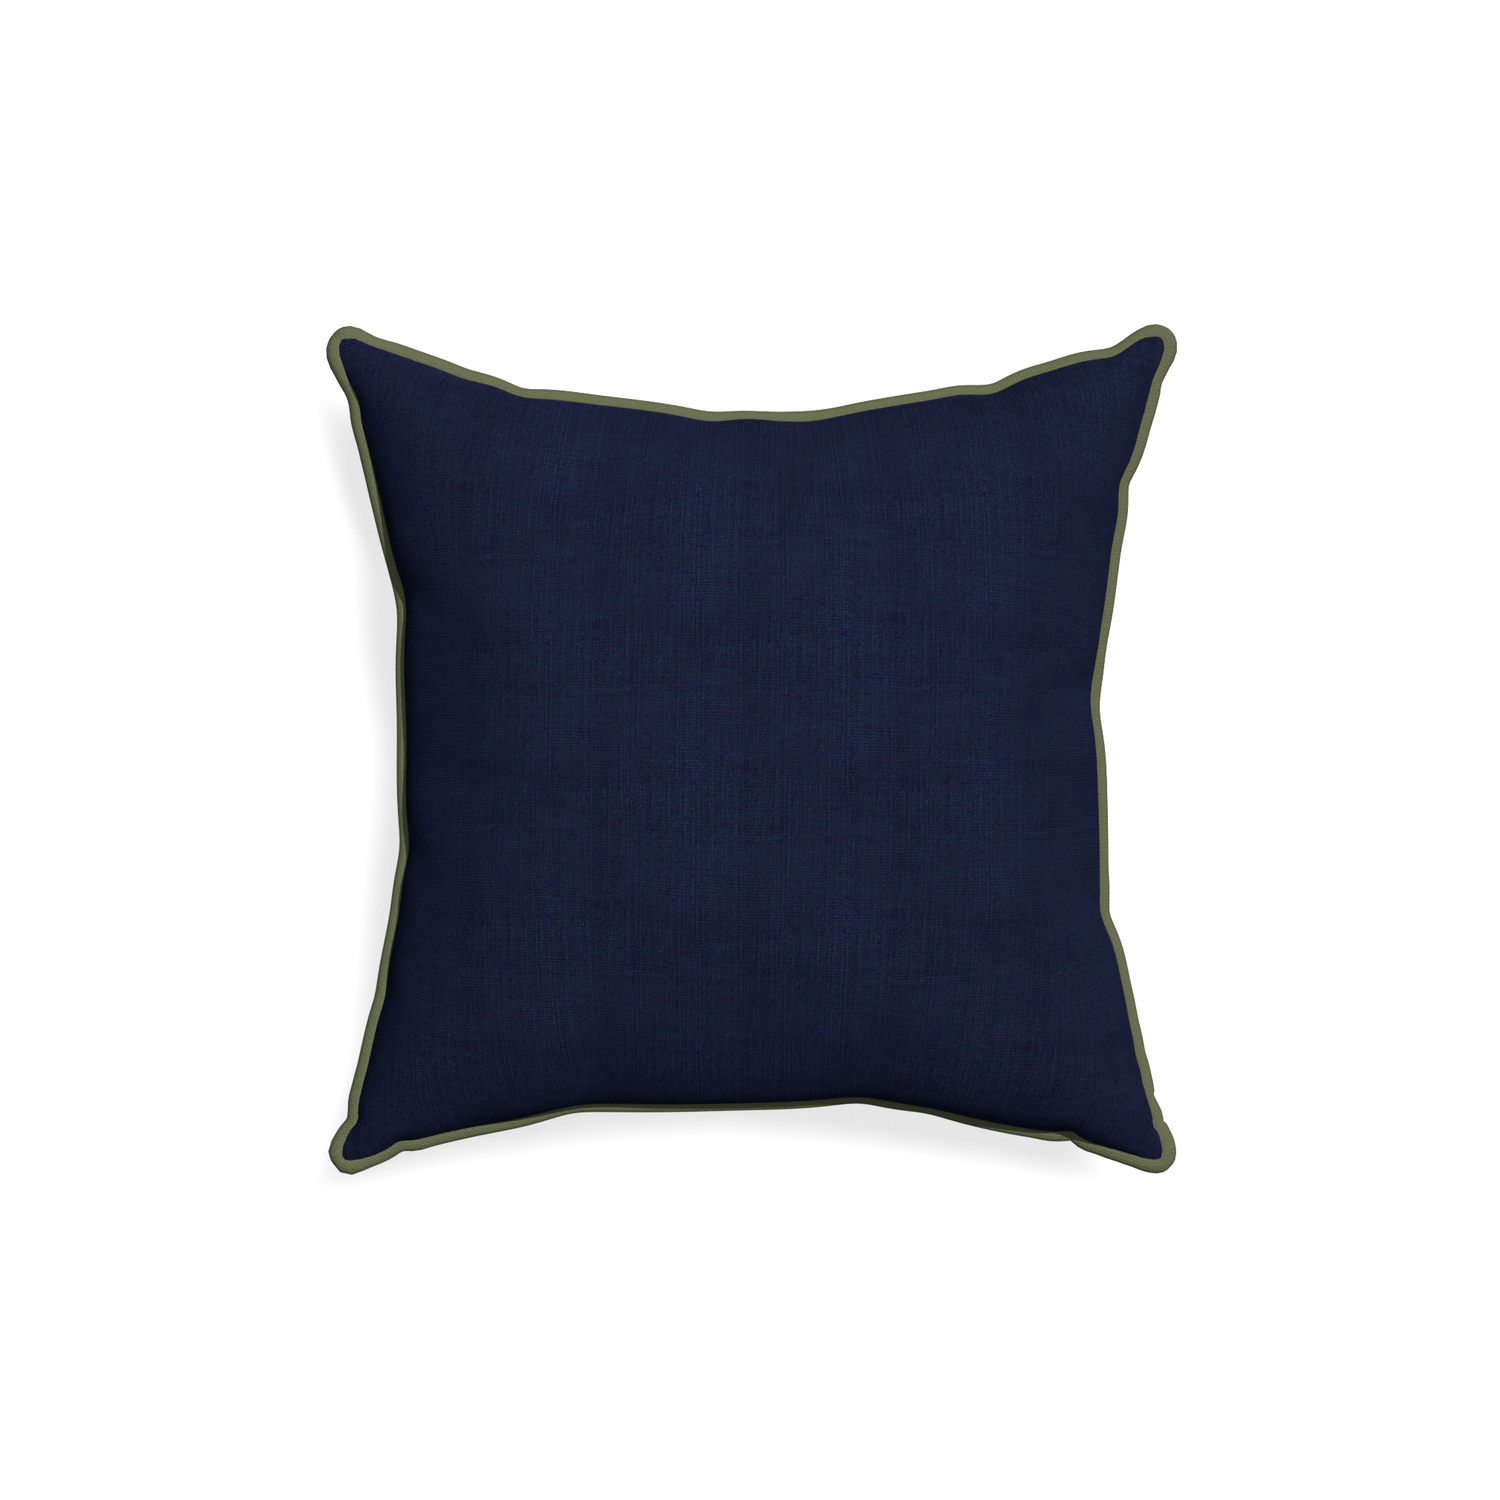 18-square midnight custom pillow with f piping on white background